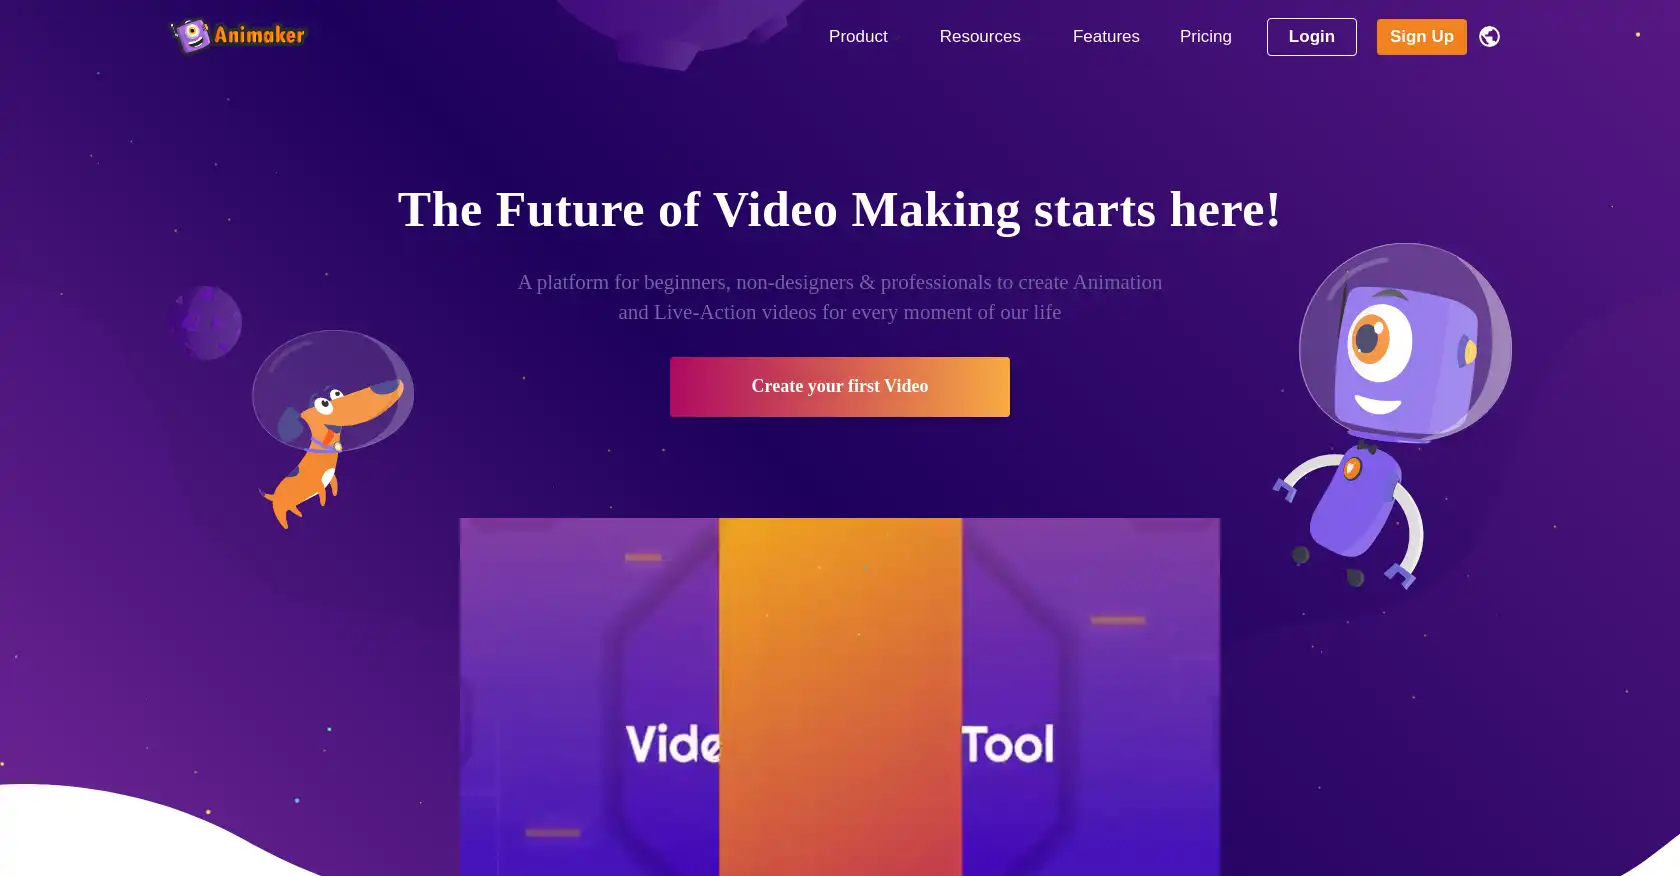 Animaker - AI tool for Video Creation, Animation